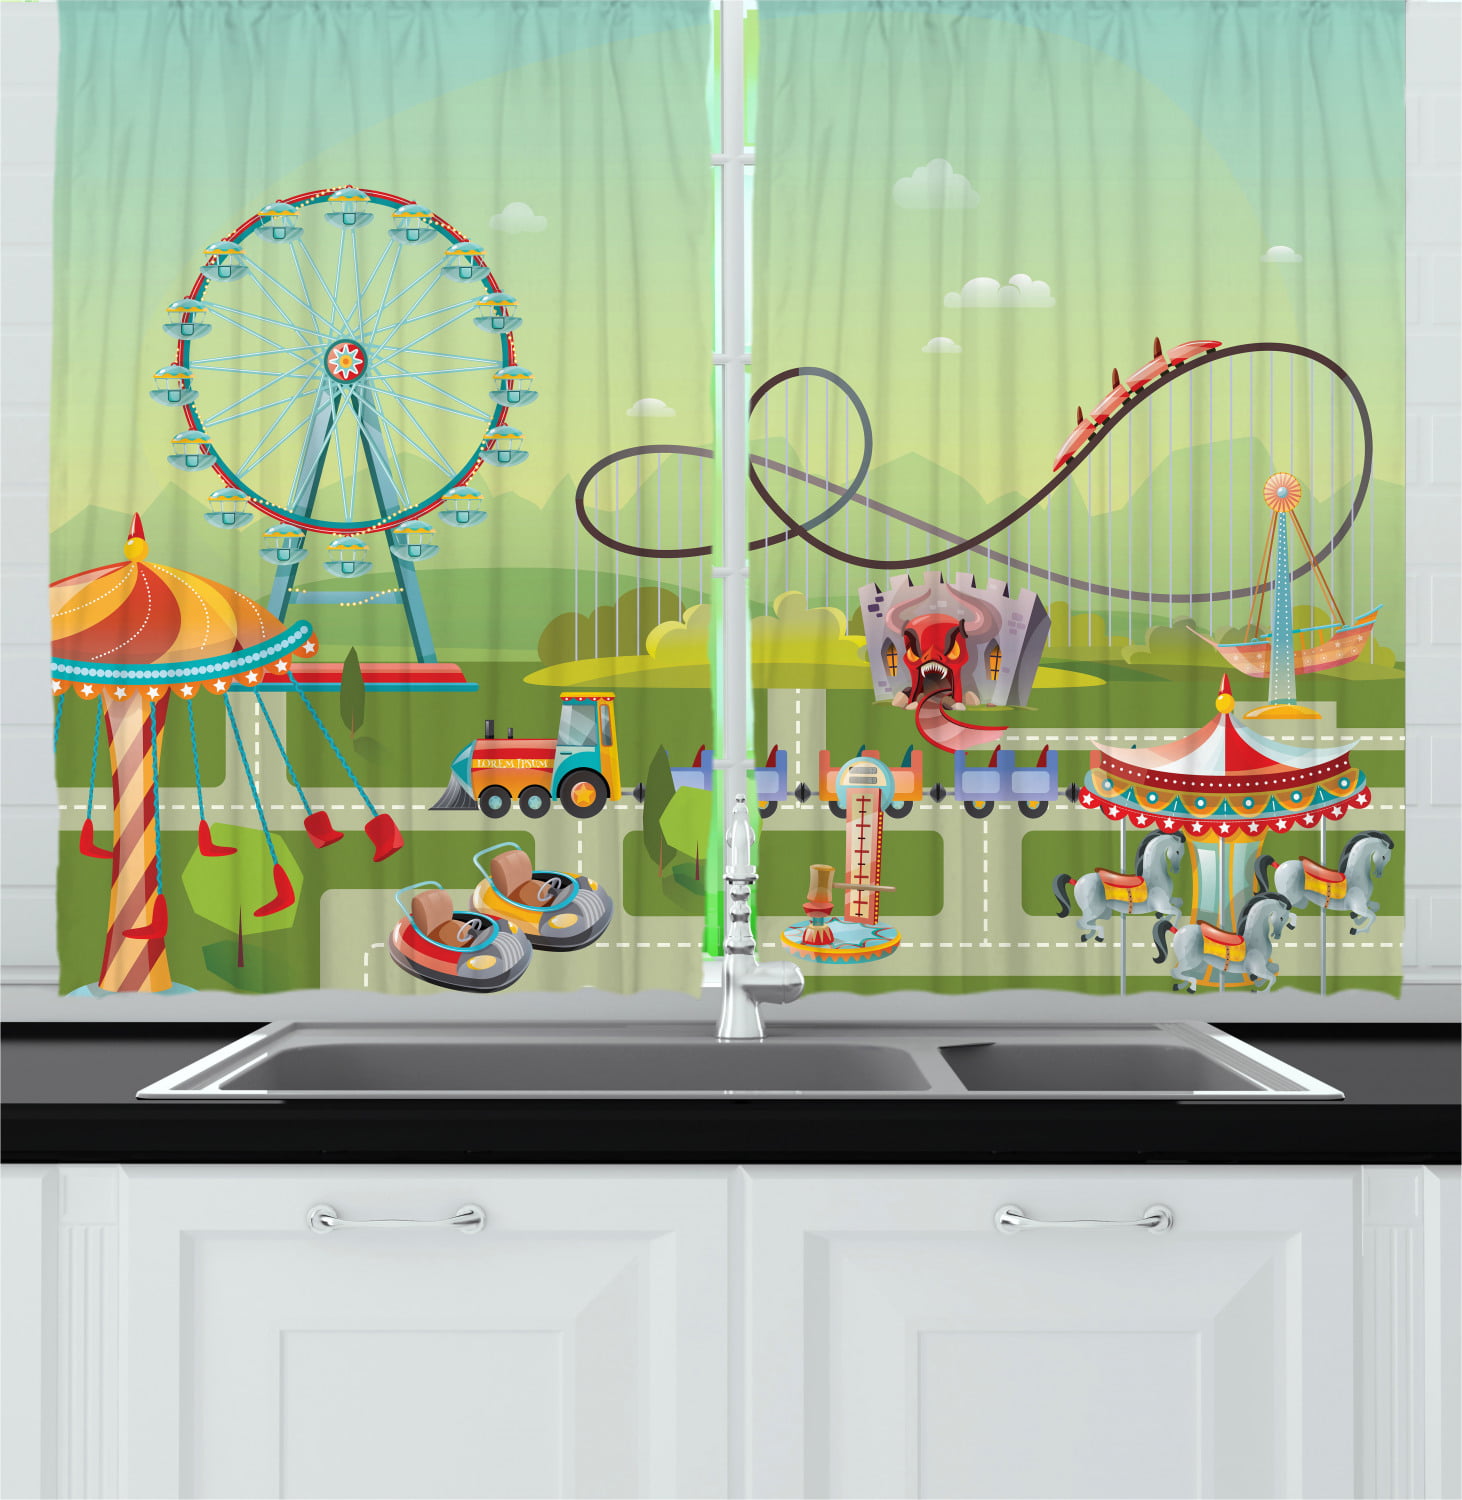 Ferris Wheel Curtains 2 Panels Set, Graphic Composition of an Amusement Park with Bumper Cars Horror Tunnel Swings, Window Drapes for Living Room Bedroom, 55W X 39L Inches, Multicolor, by Ambesonne